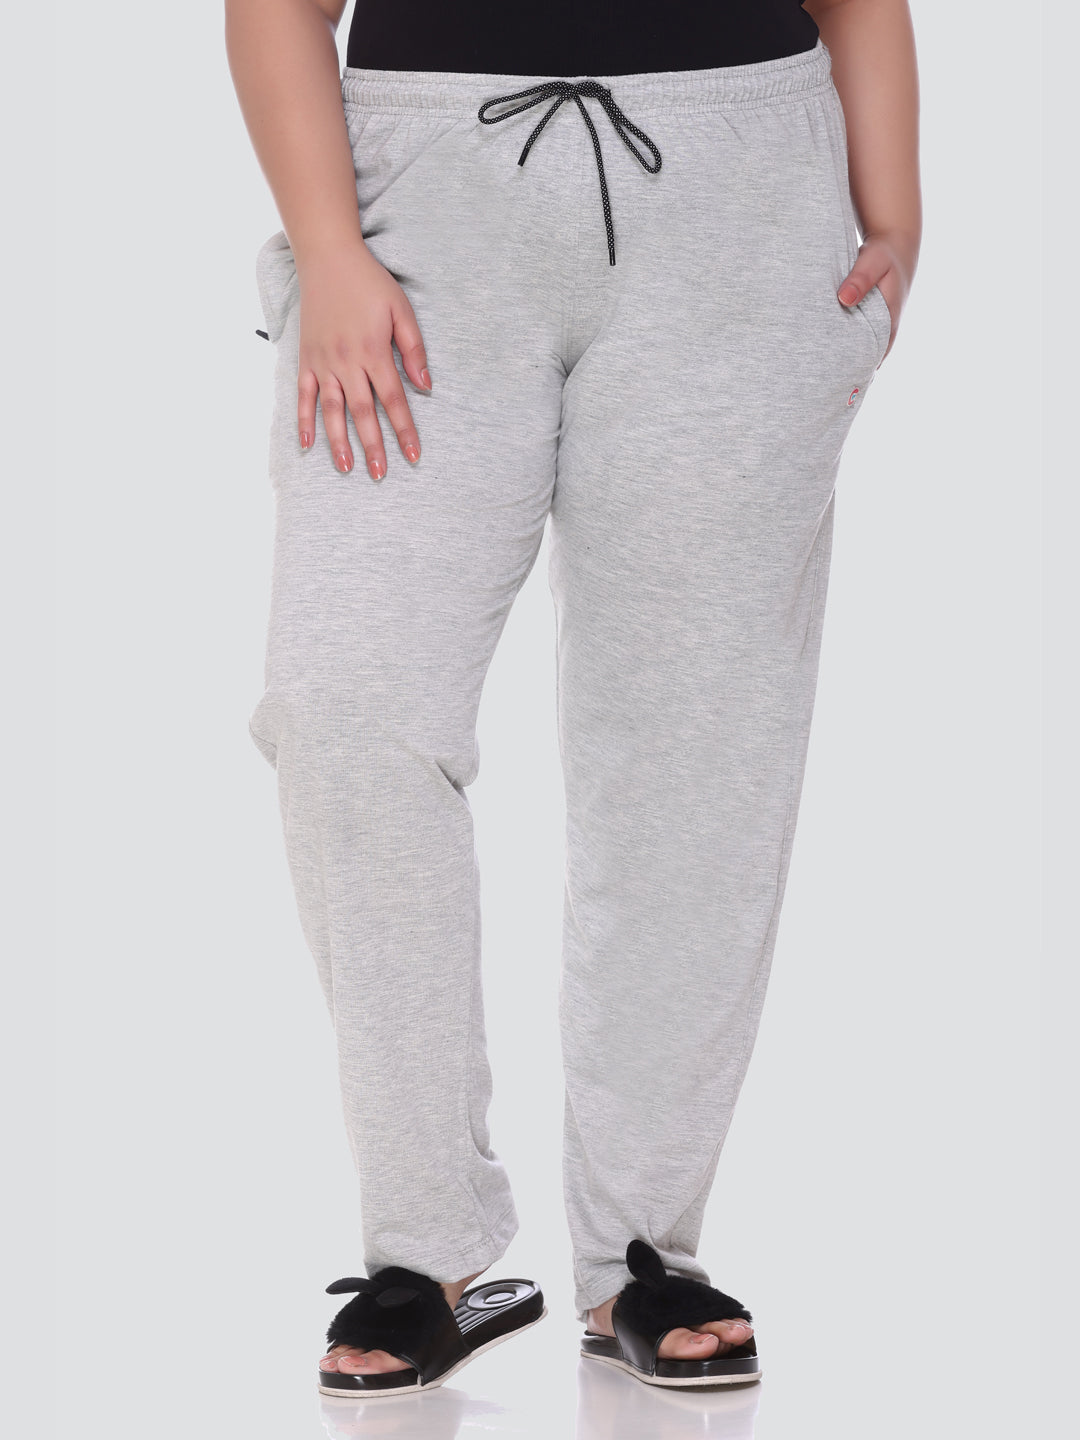 Cotton Plus Size Track Pants For Women - Regular Fit Lowers at Rs 770.00, Ladies  Track Pants